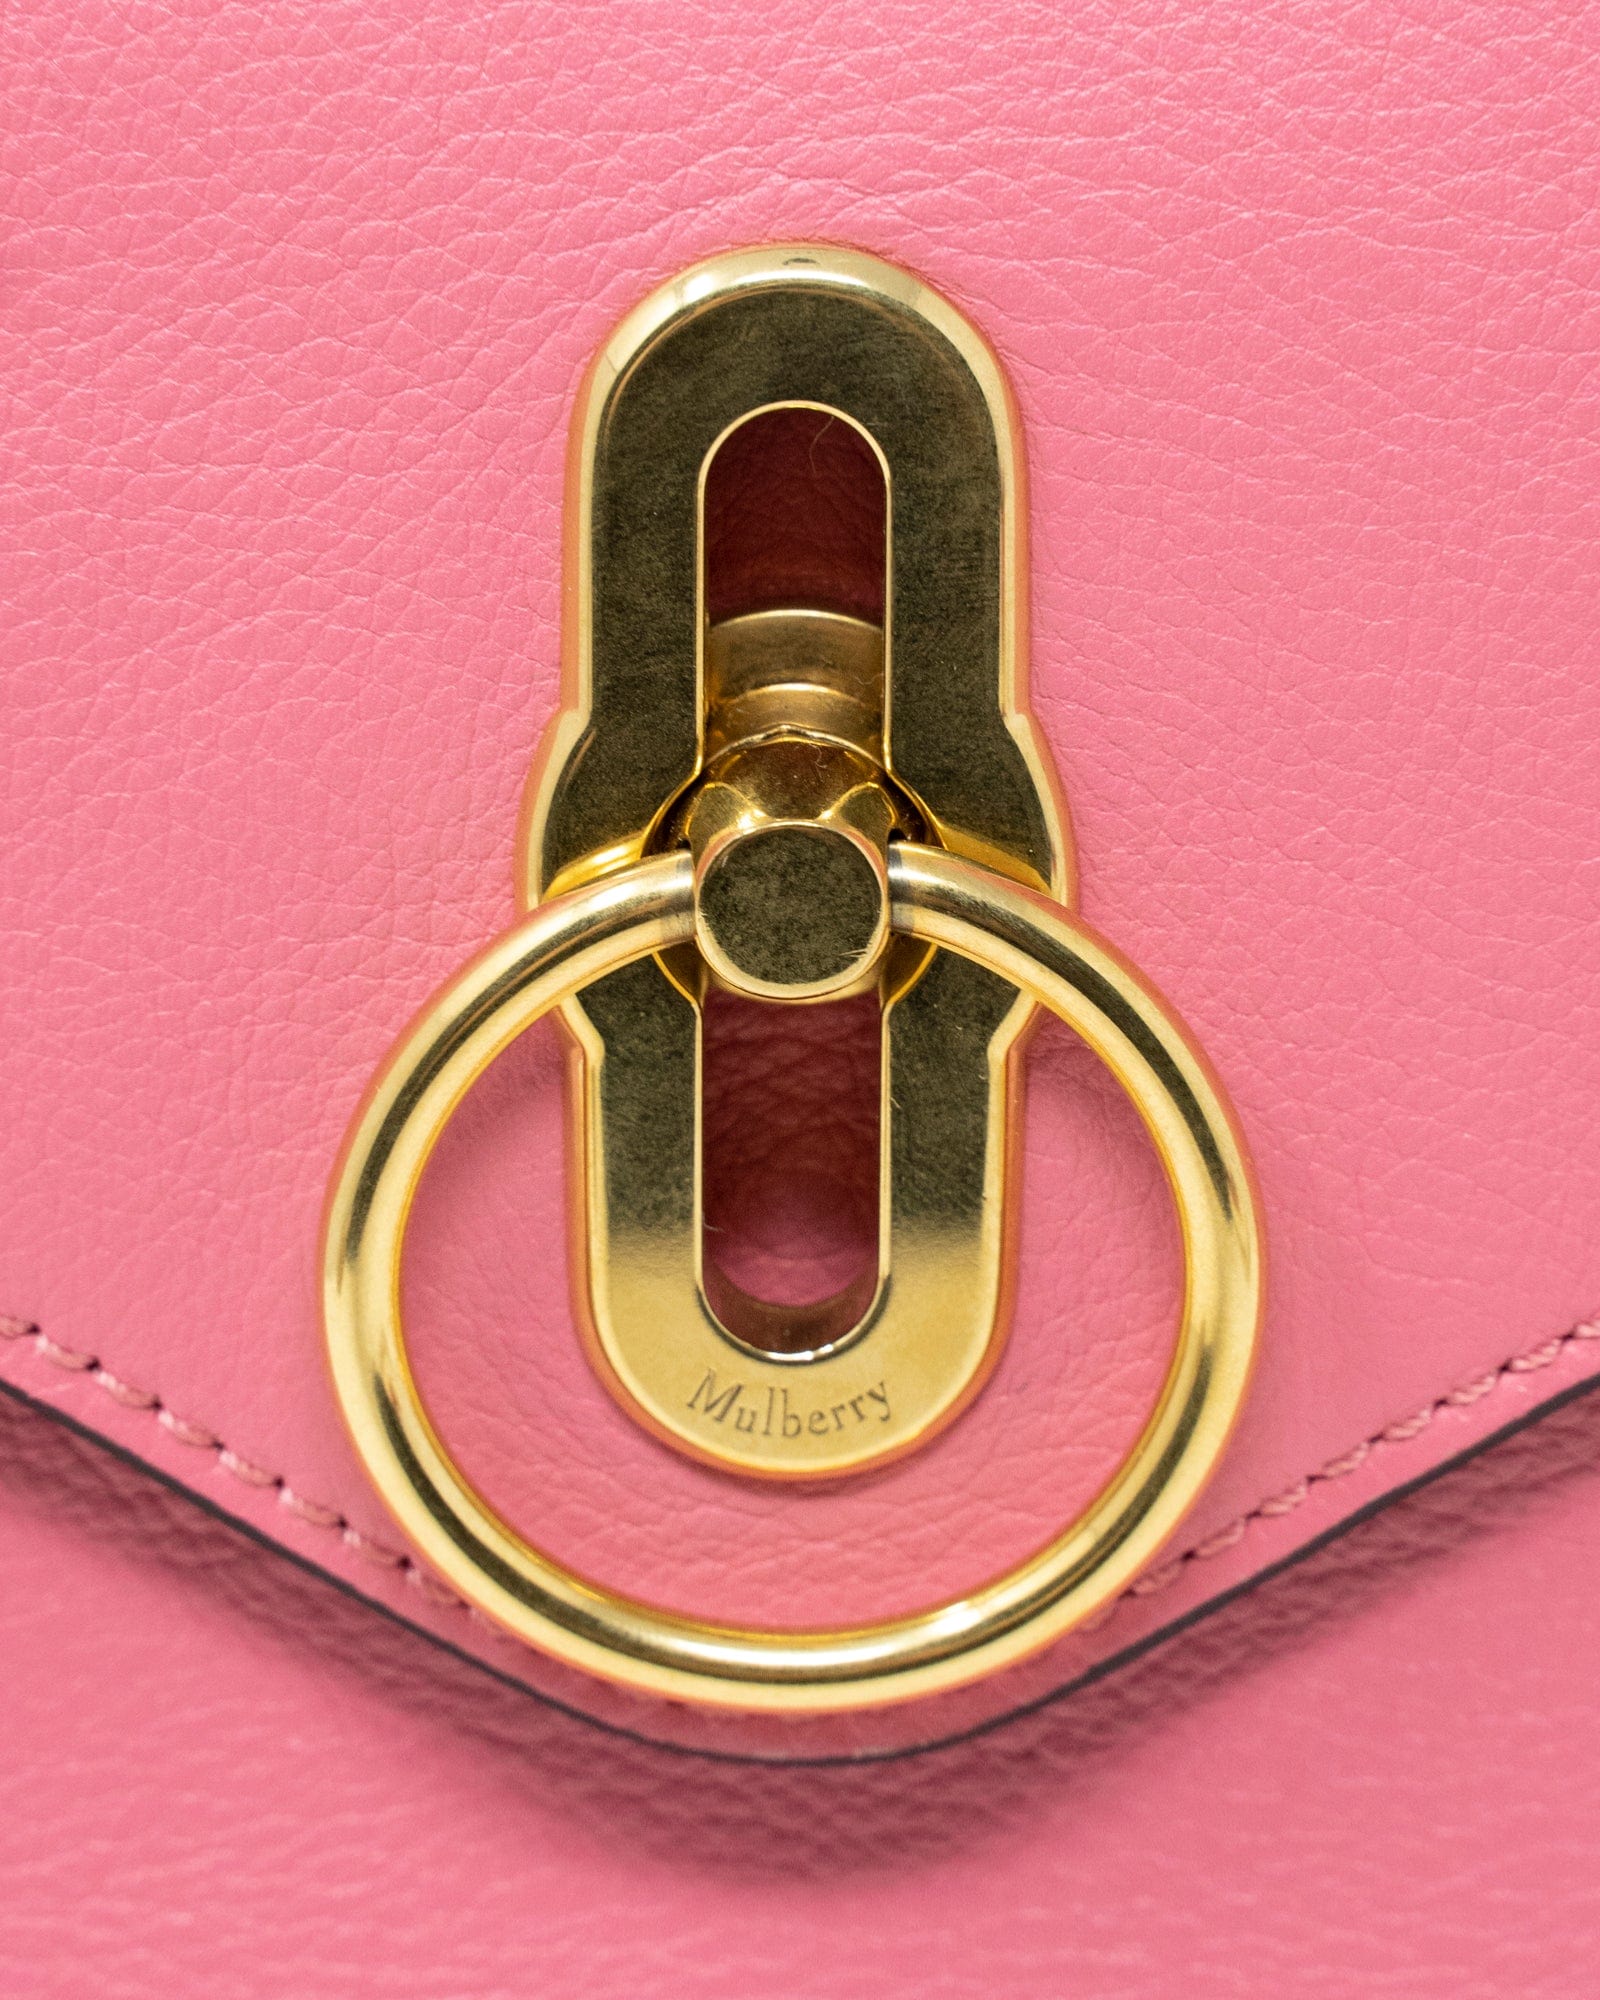 Mulberry Mulberry seaton small leather bag in hot pink, with gold hardware.  - AGL2013